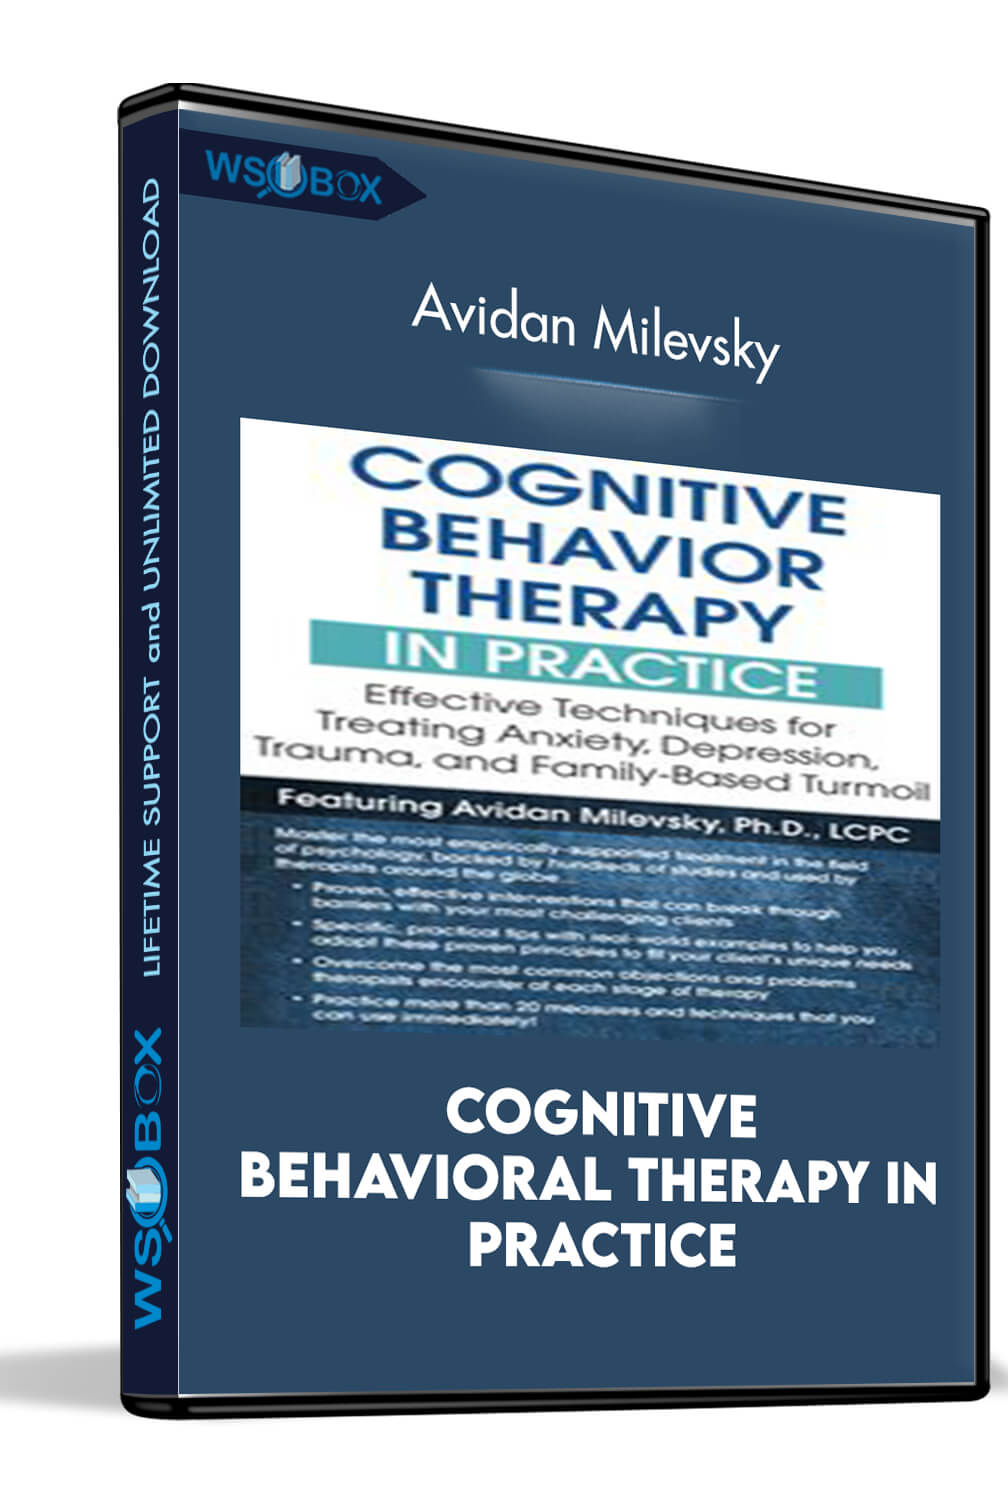 Cognitive Behavioral Therapy in Practice: Effective Techniques for Treating Anxiety, Depression, Trauma, and Family-Based Turmoil – Avidan Milevsky